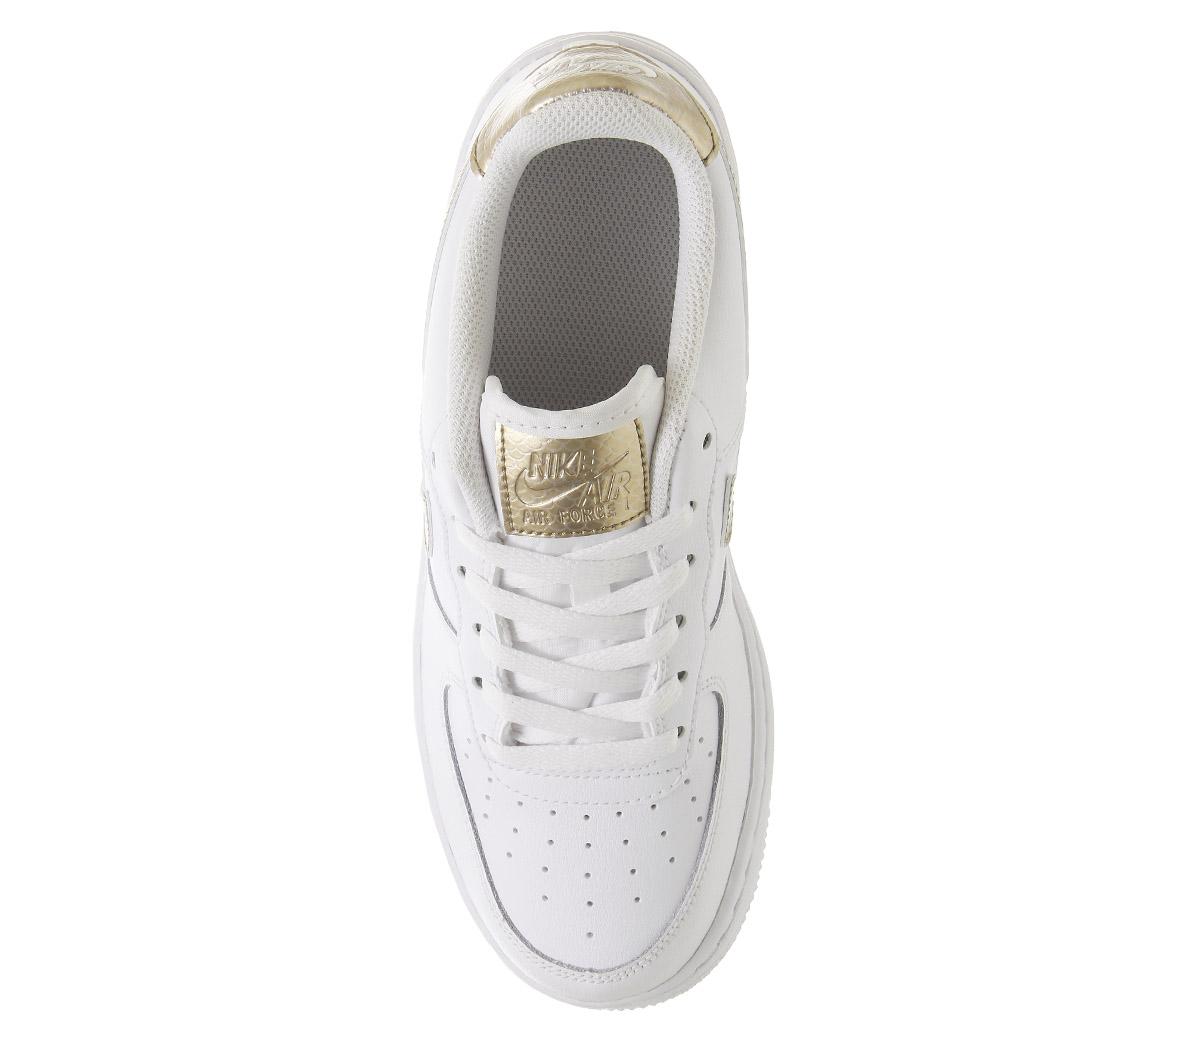 Nike Air Force 1 Trainers White Blush Gold - Women's Trainers